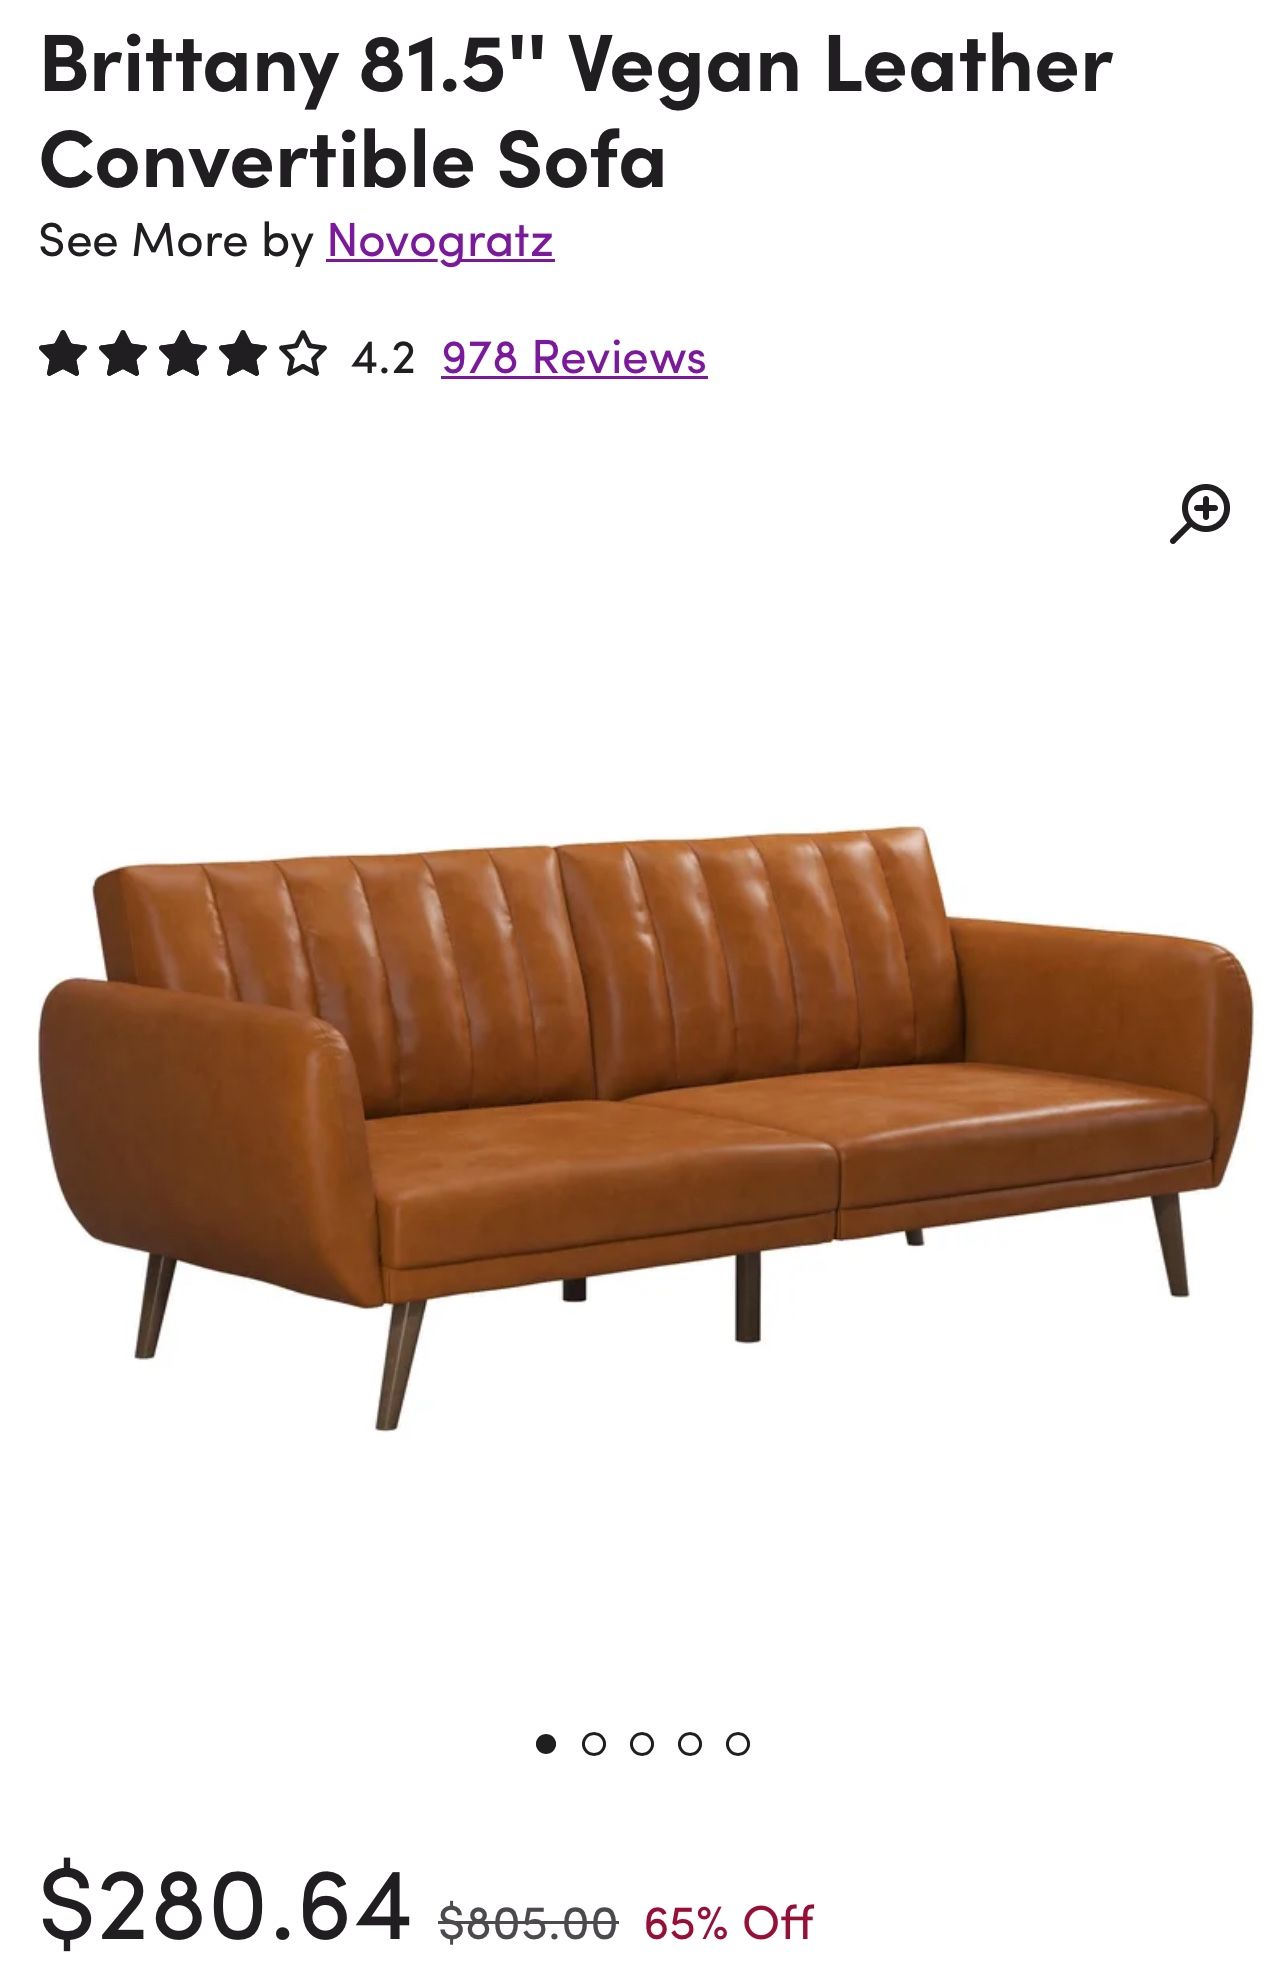 FREE Vegan Leather Convertible Sofa/Couch